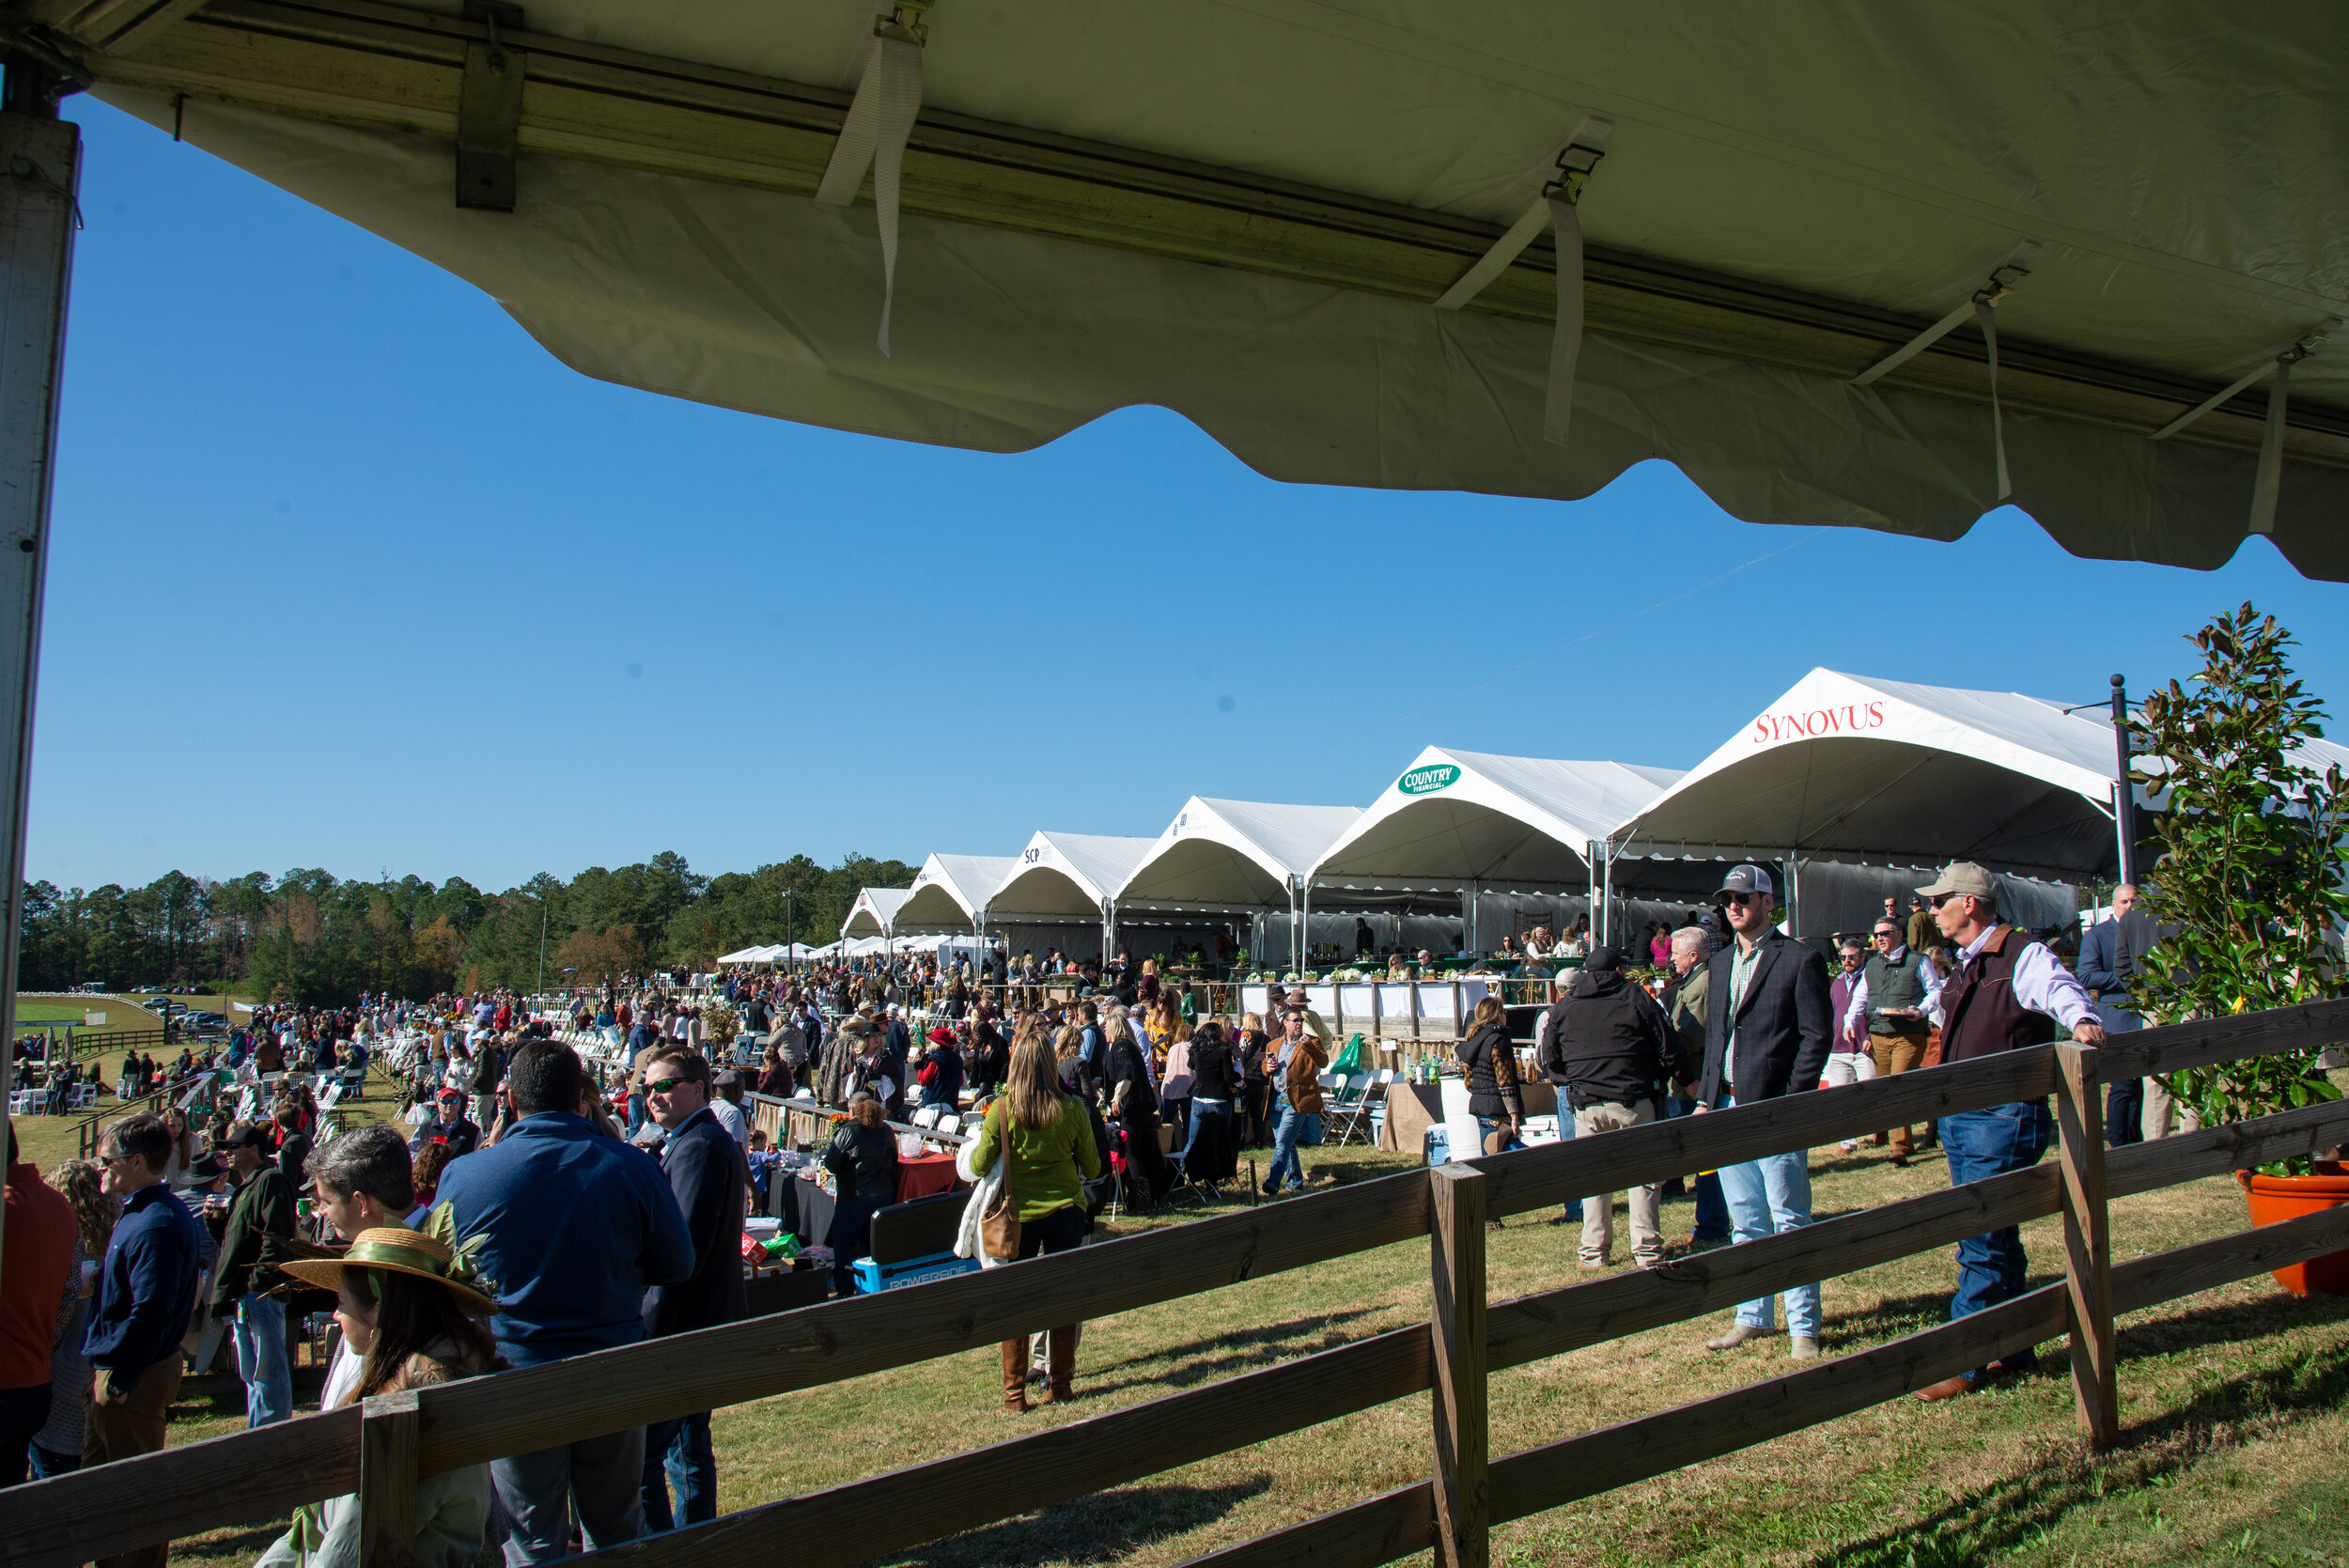 2019 Steeplechase at Callaway benefitting the Arts